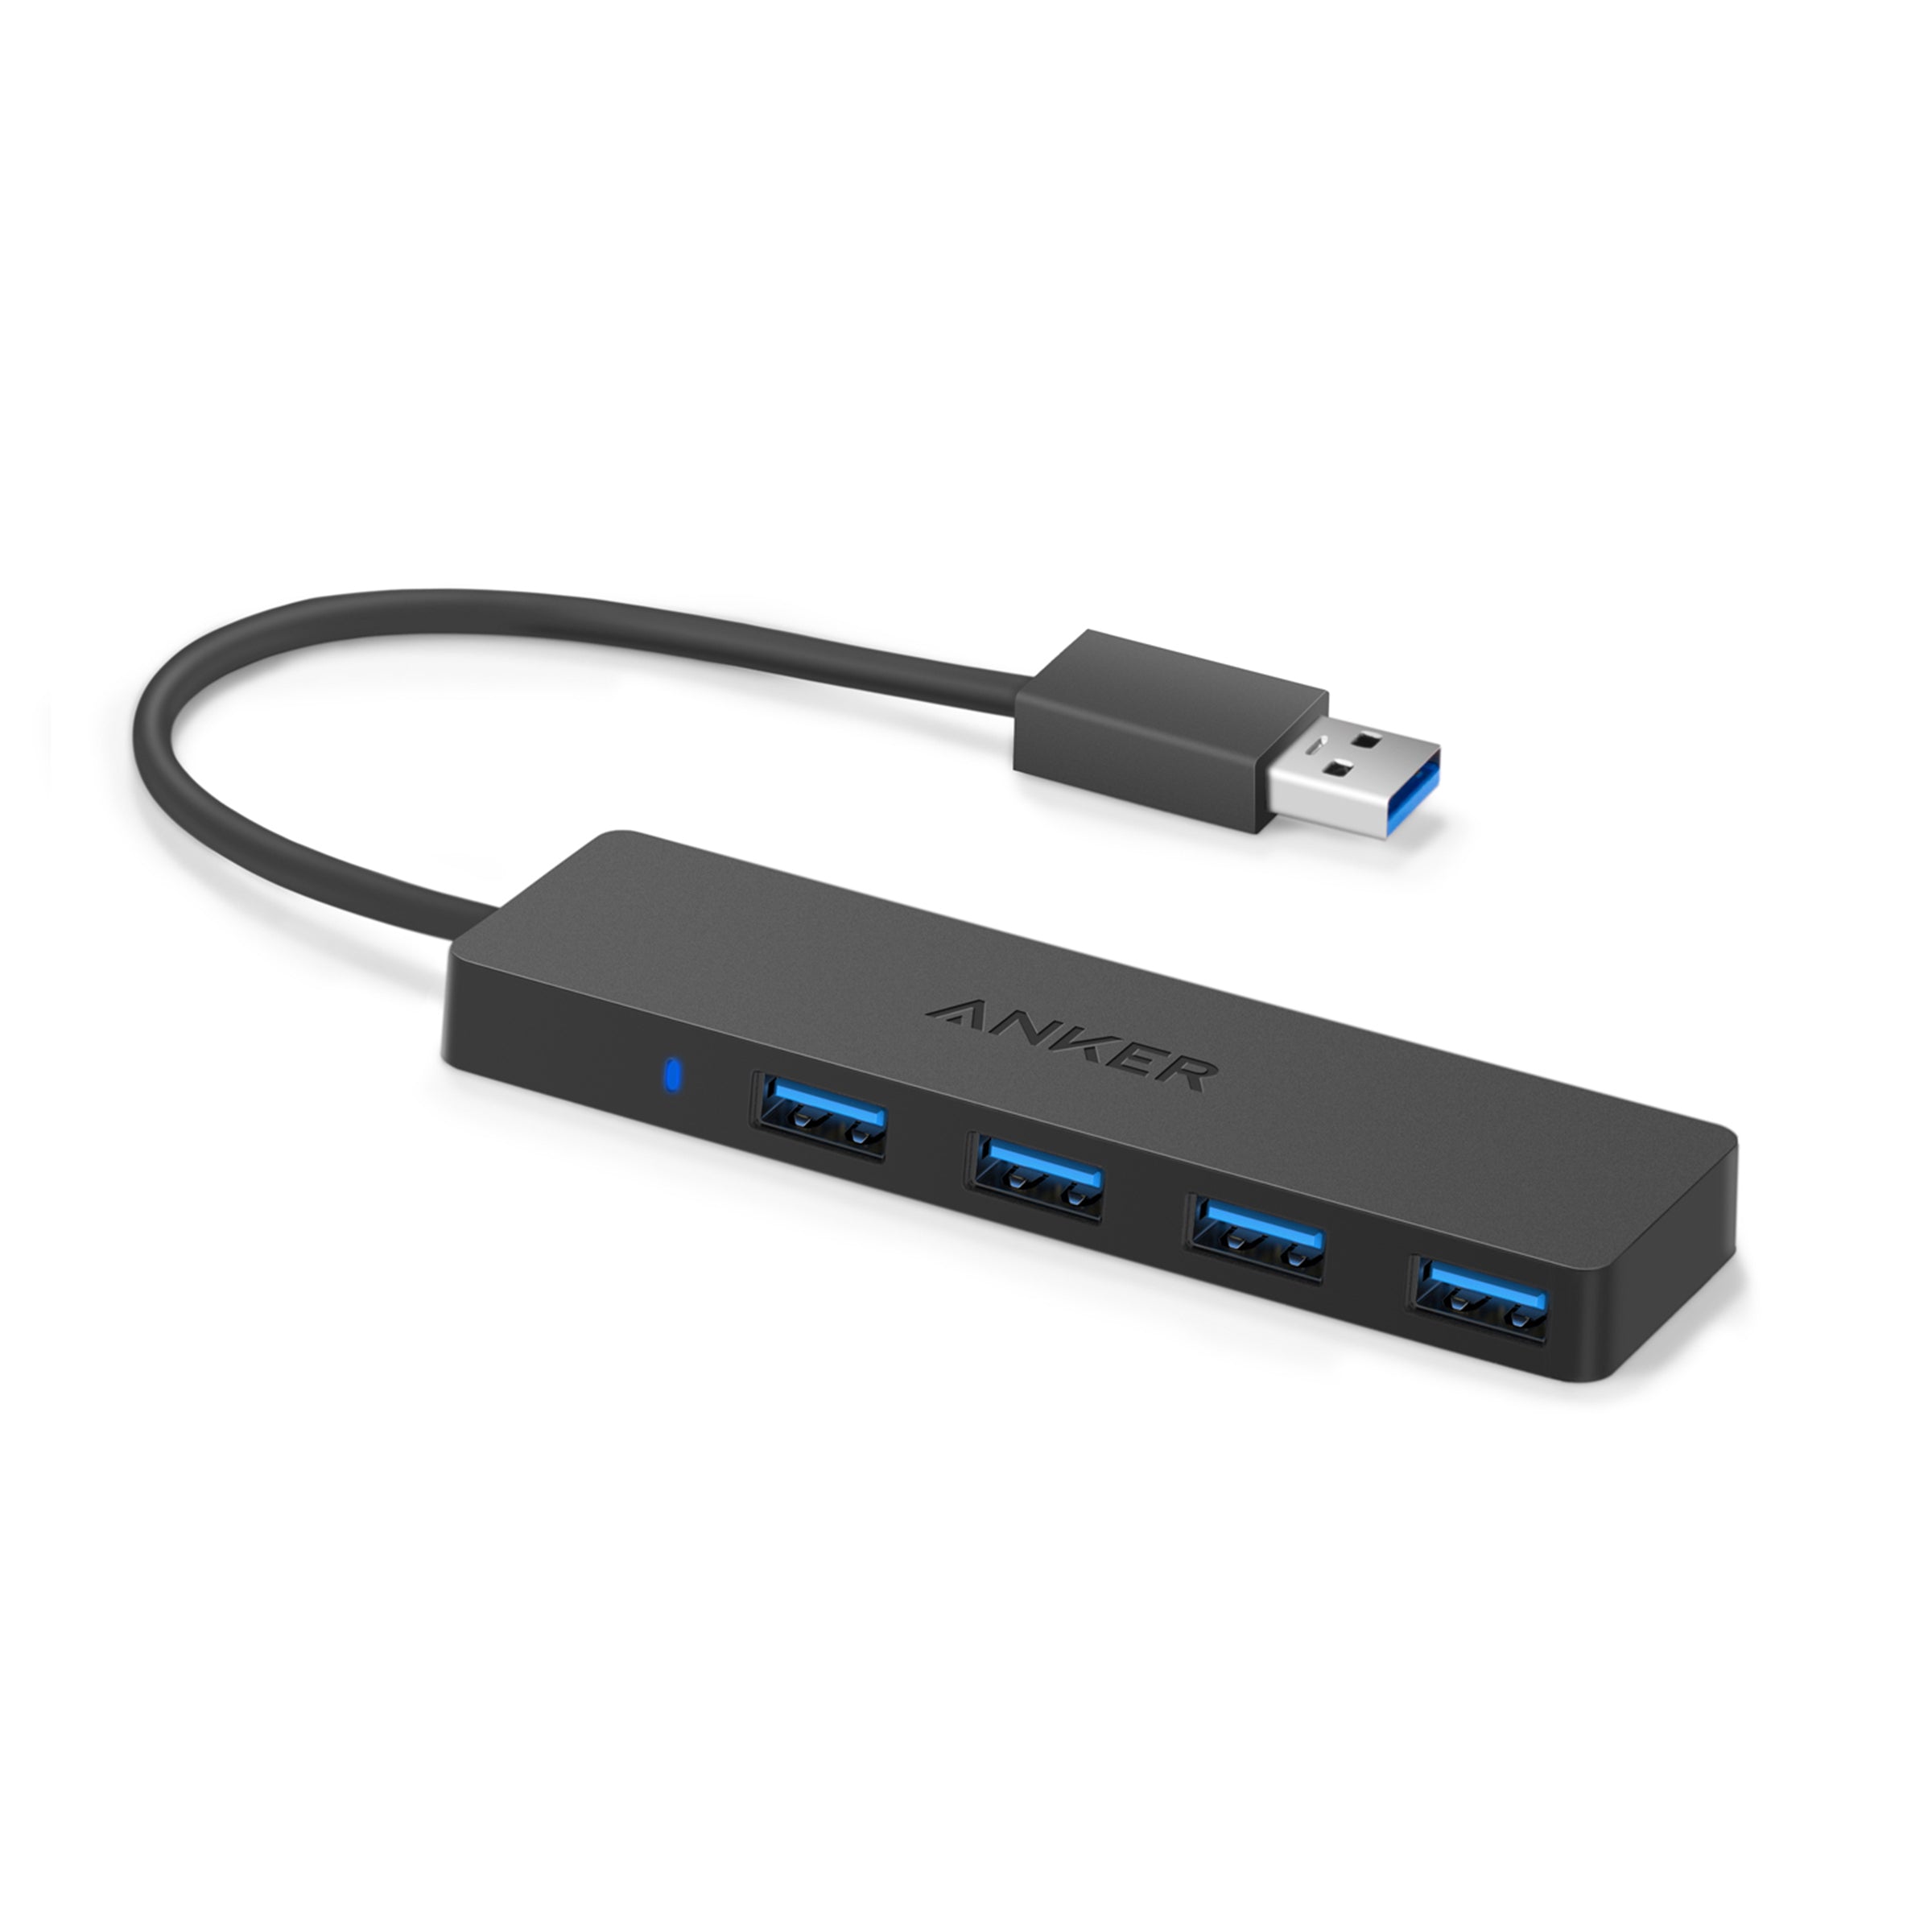 Anker 4-Port USB 3.0 Hub, Ultra-Slim Data USB Hub with 2 ft Extended Cable